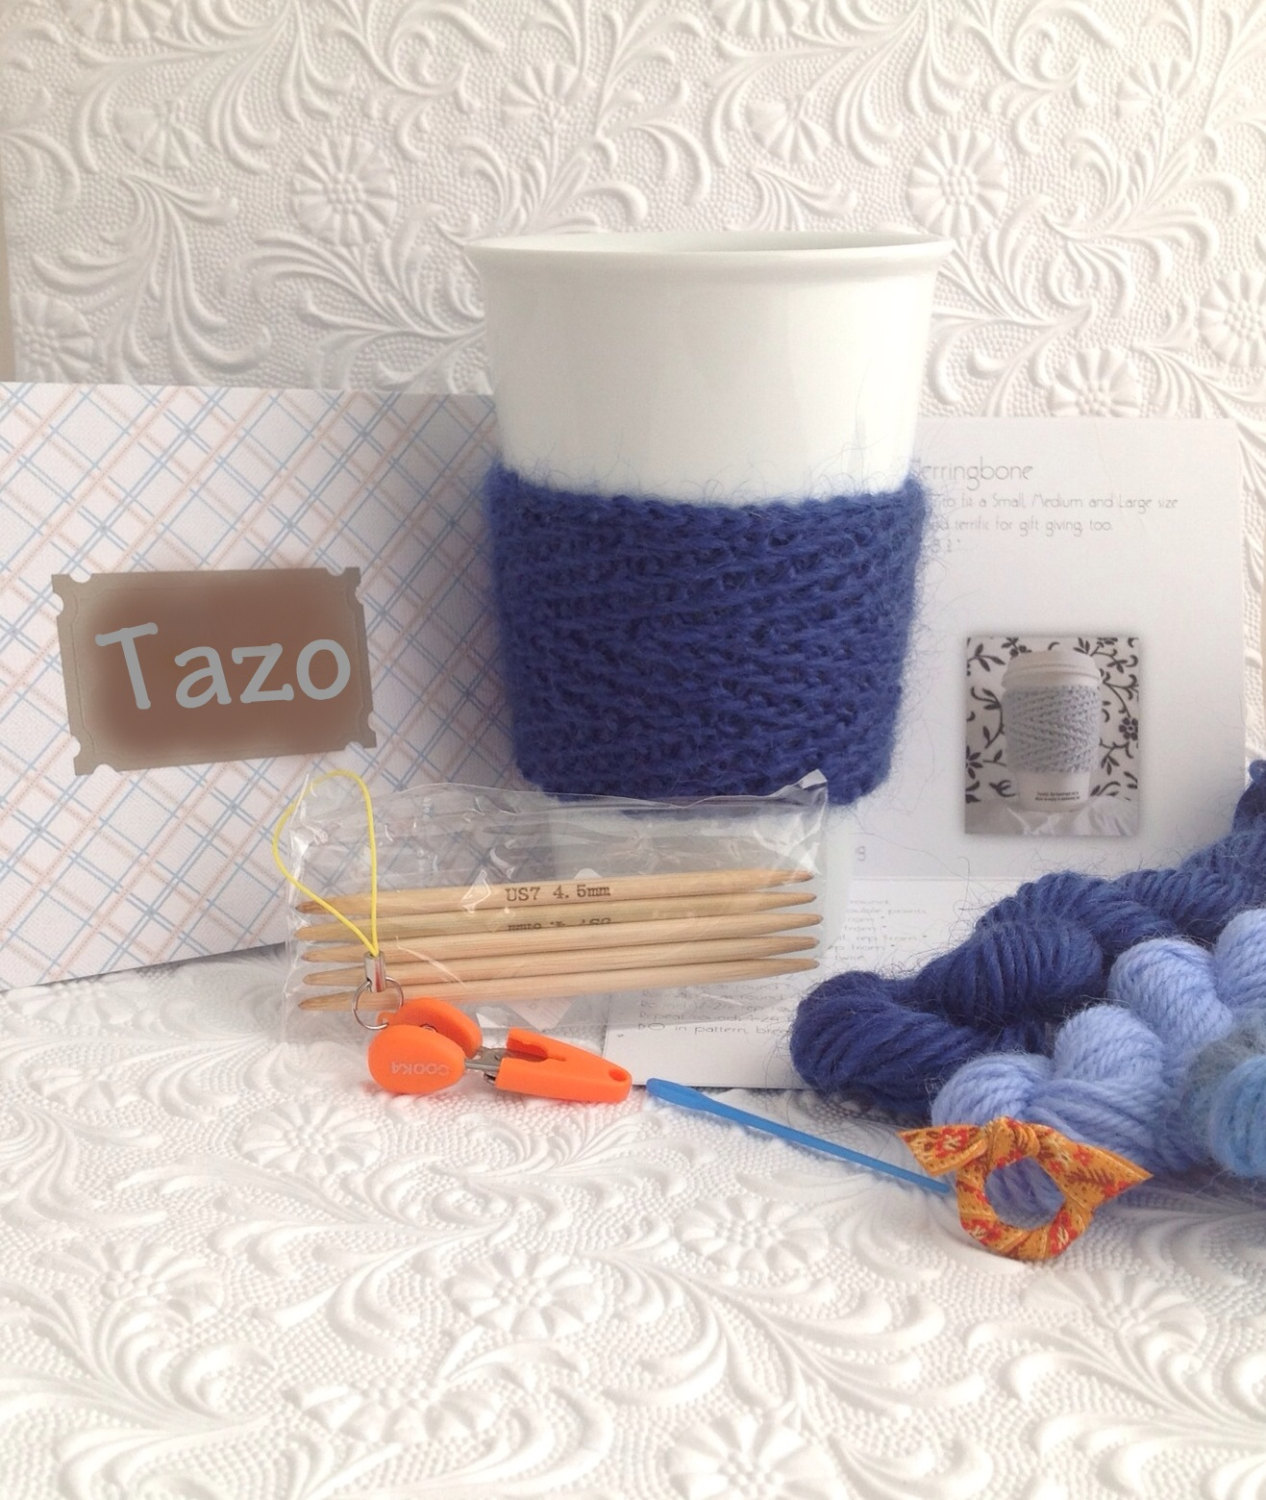 Tazo Knit Kit Featured in Better Homes and Gardens 2013 Winter DIY Publication